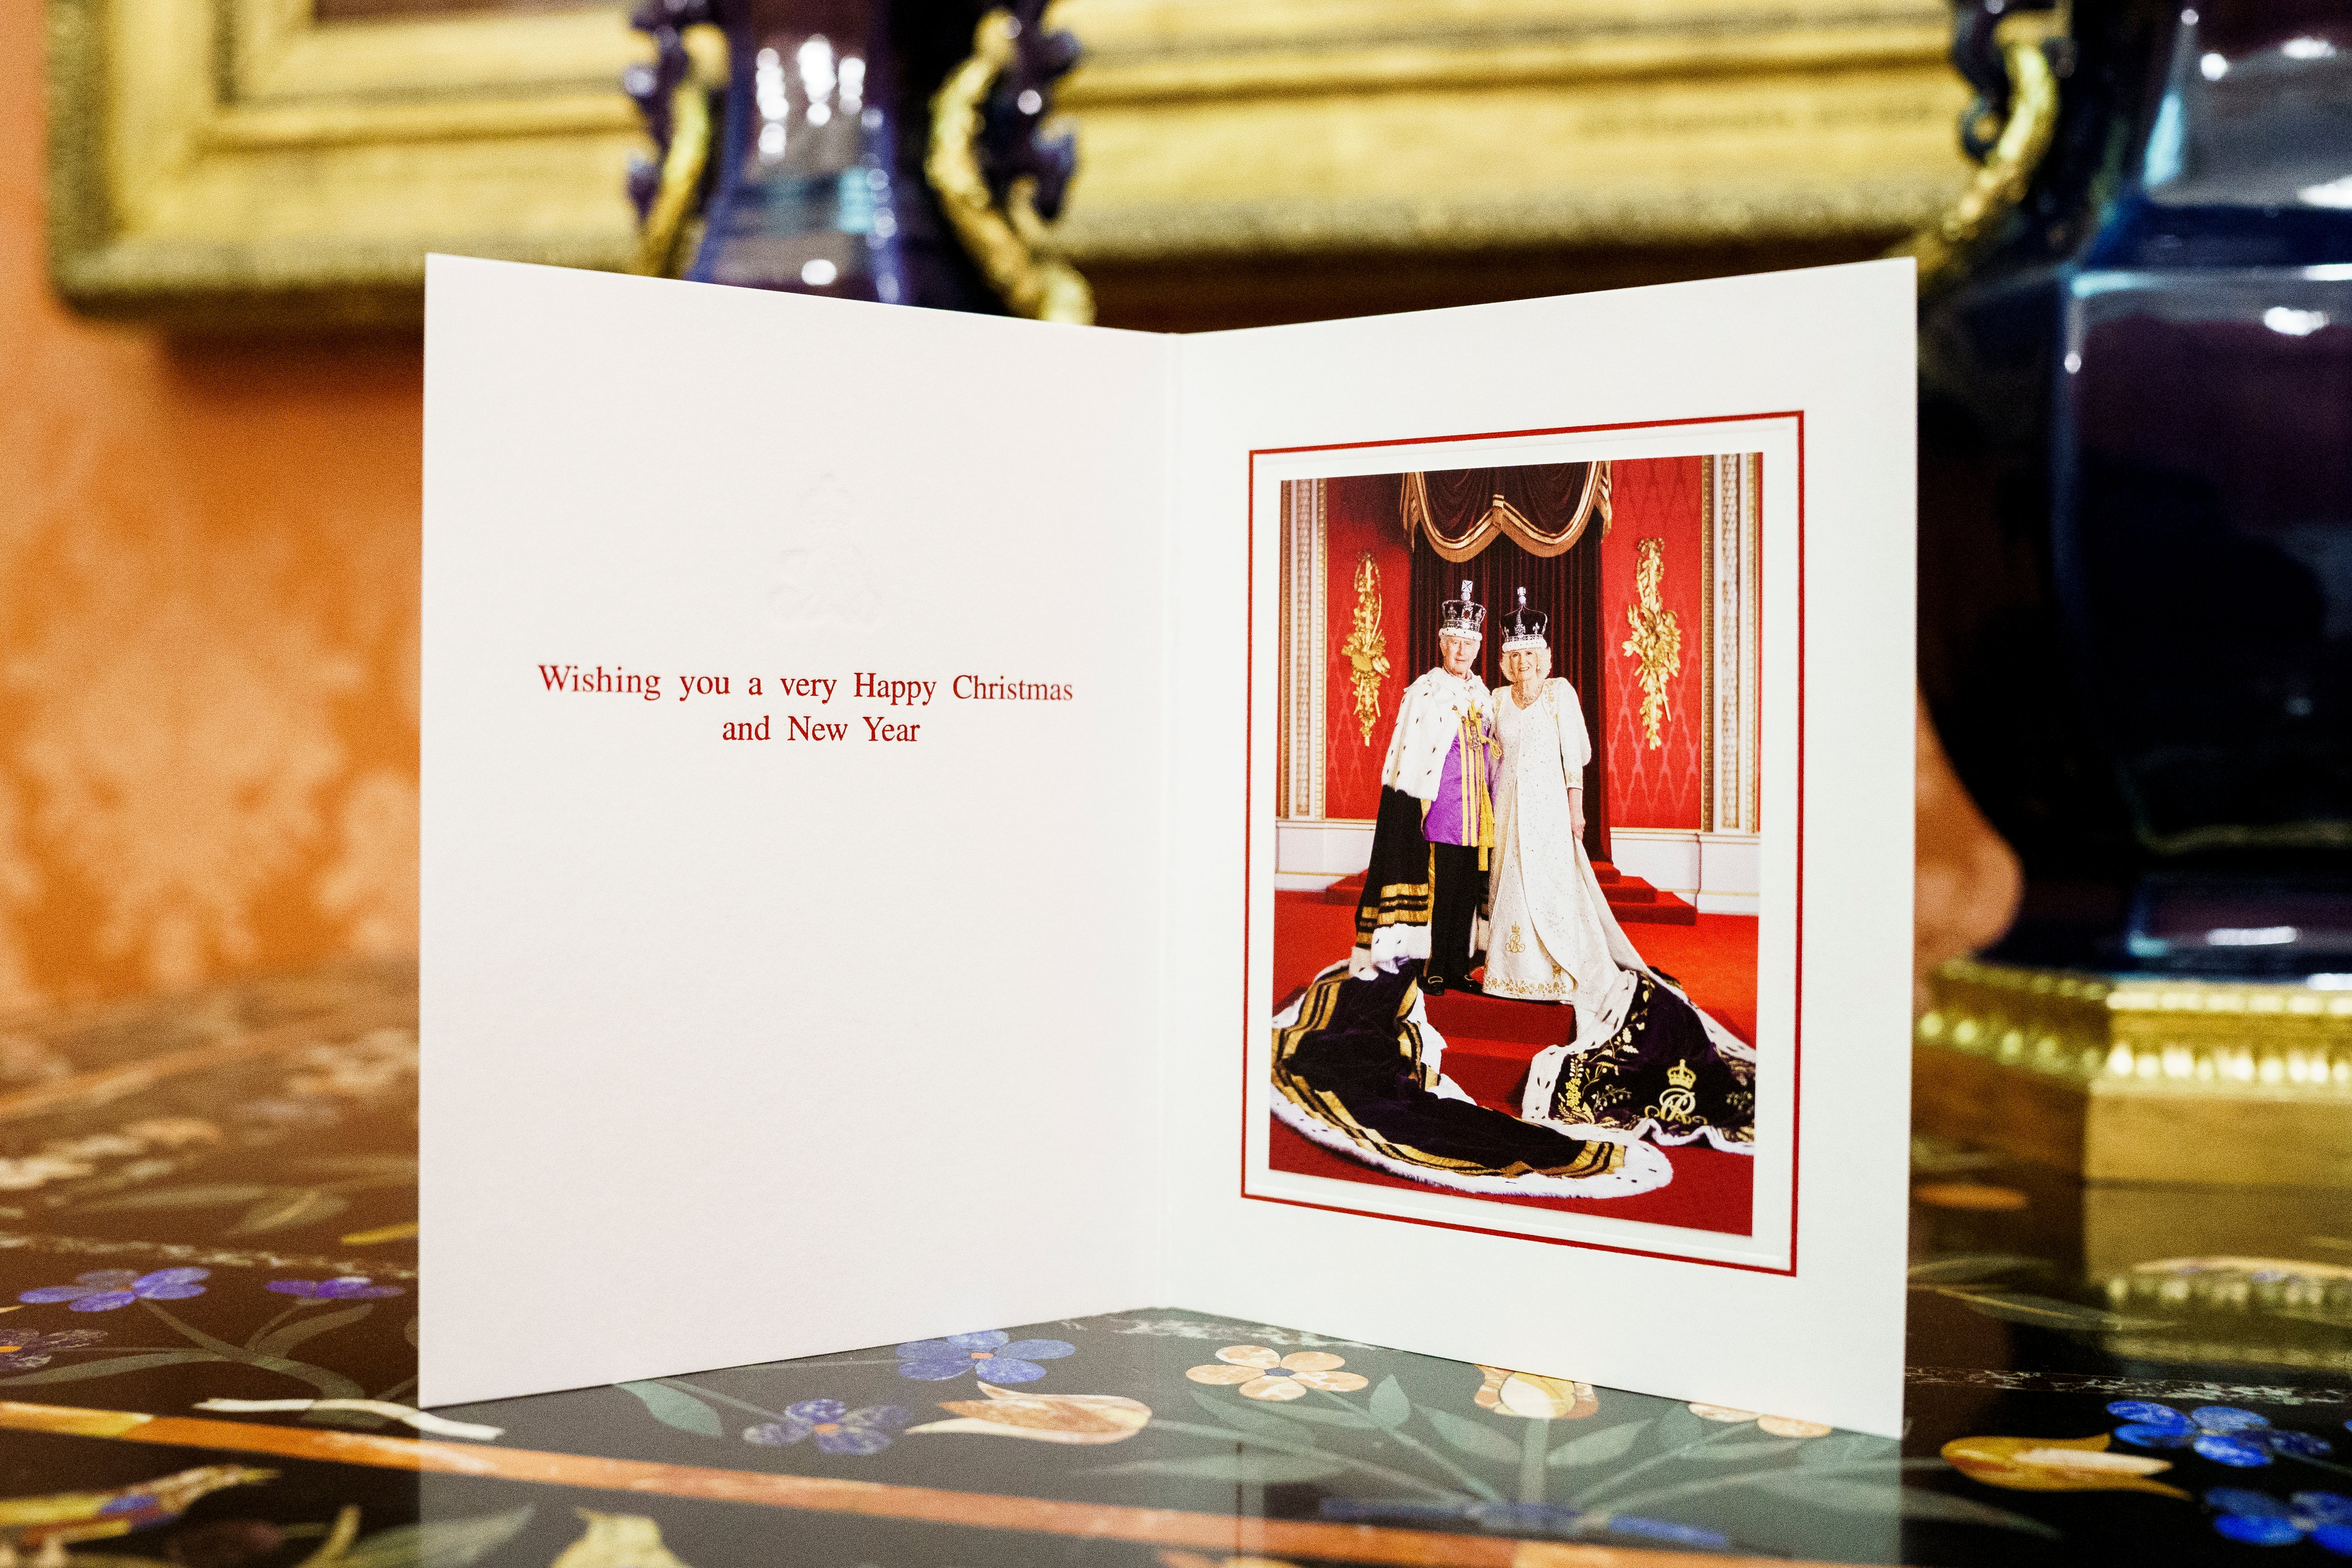 Charles and Camilla have chosen a coronation picture for their card